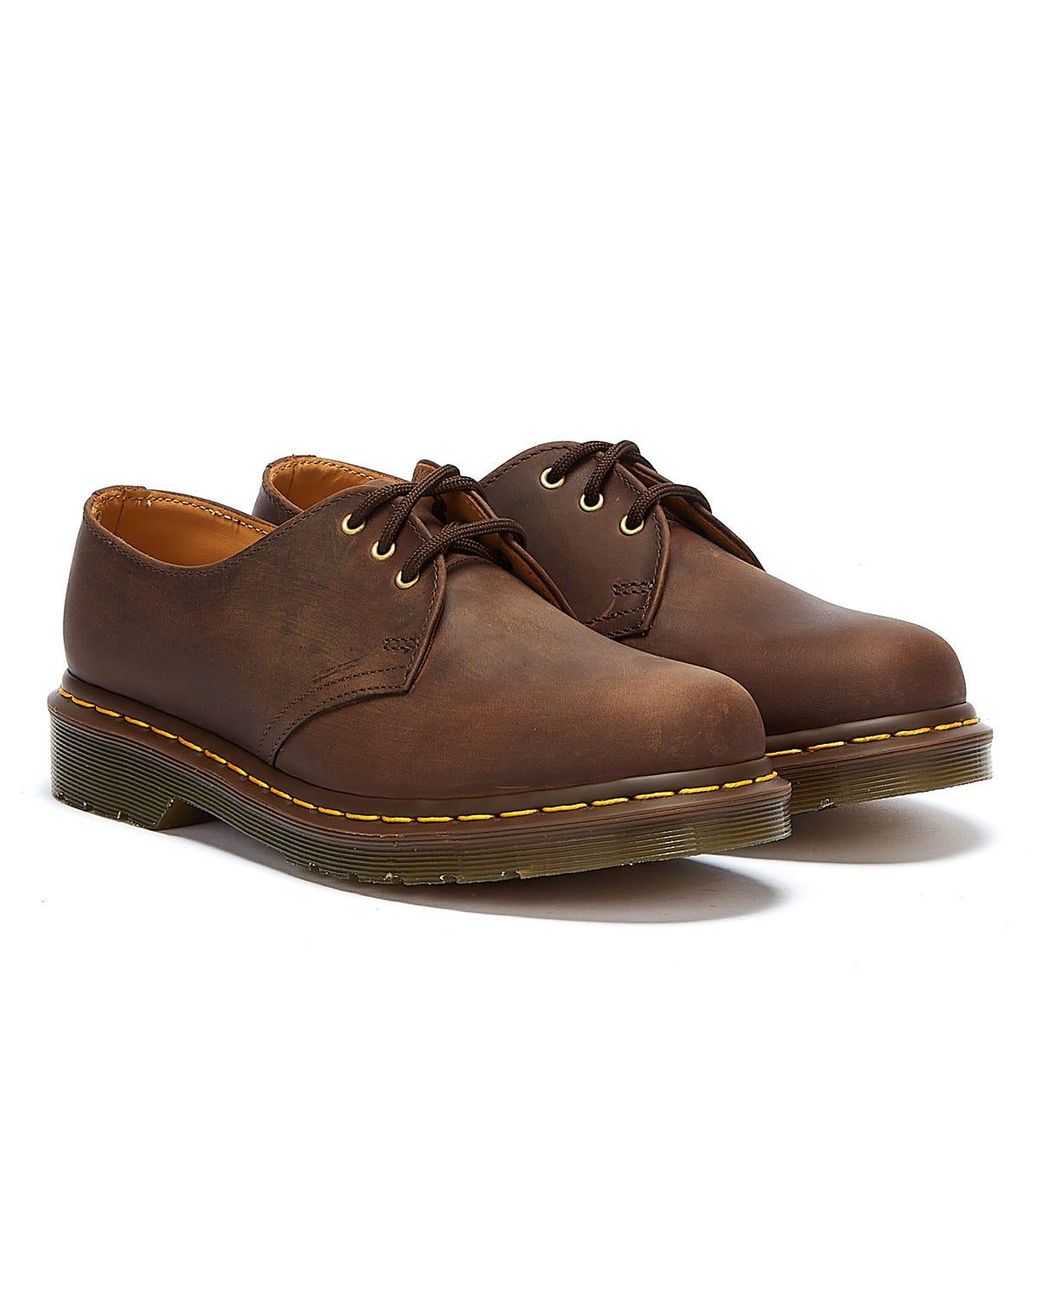 Dr. Martens Leather 1461 Smooth Shoe in Brown for Men - Save 17% - Lyst